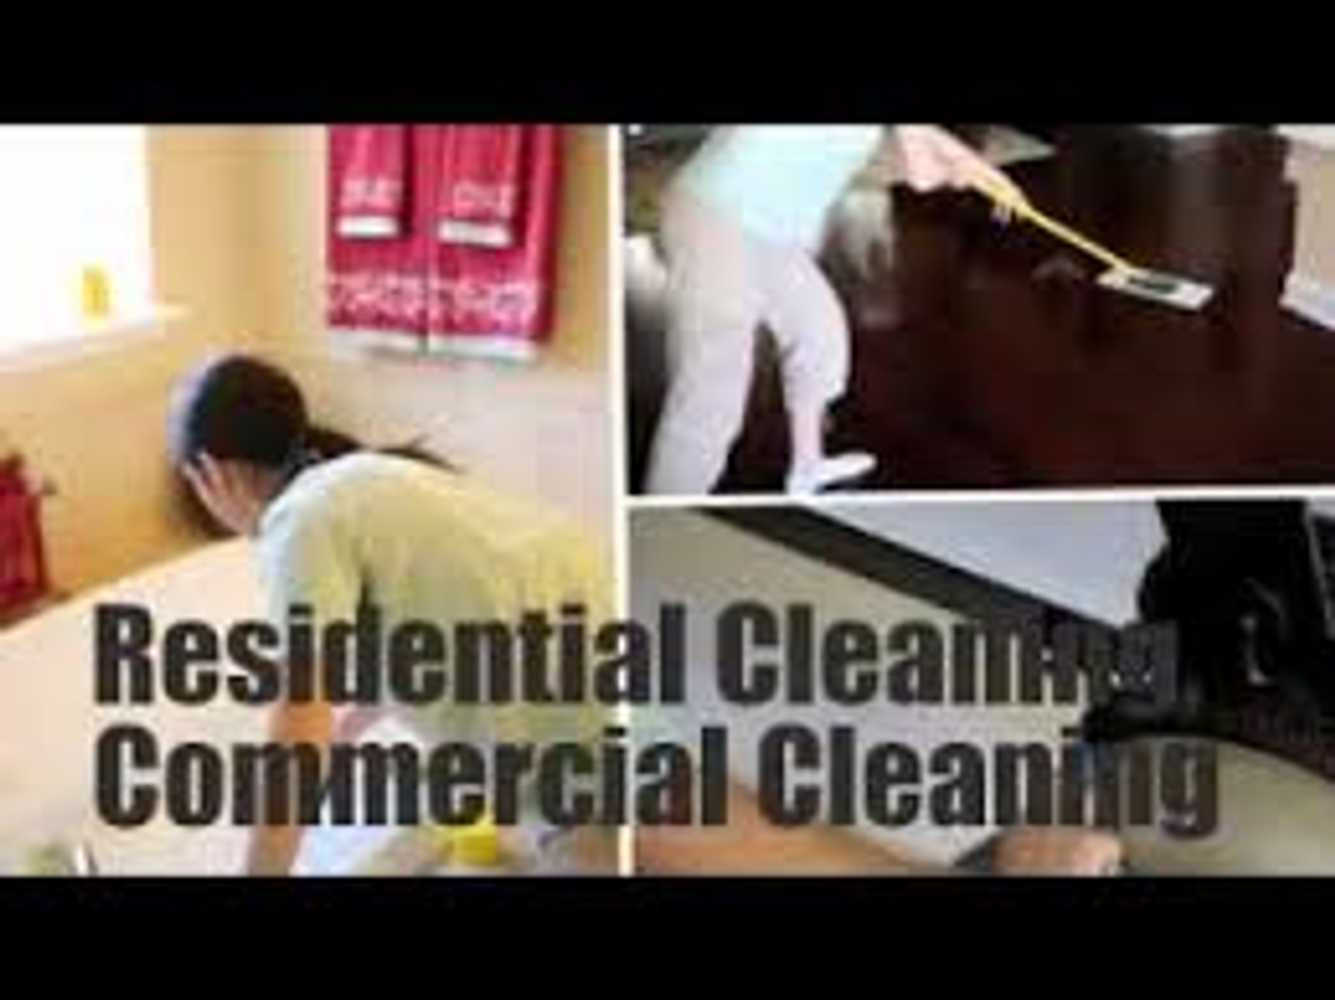 Photo(s) from C & A. Facility Cleaning Services